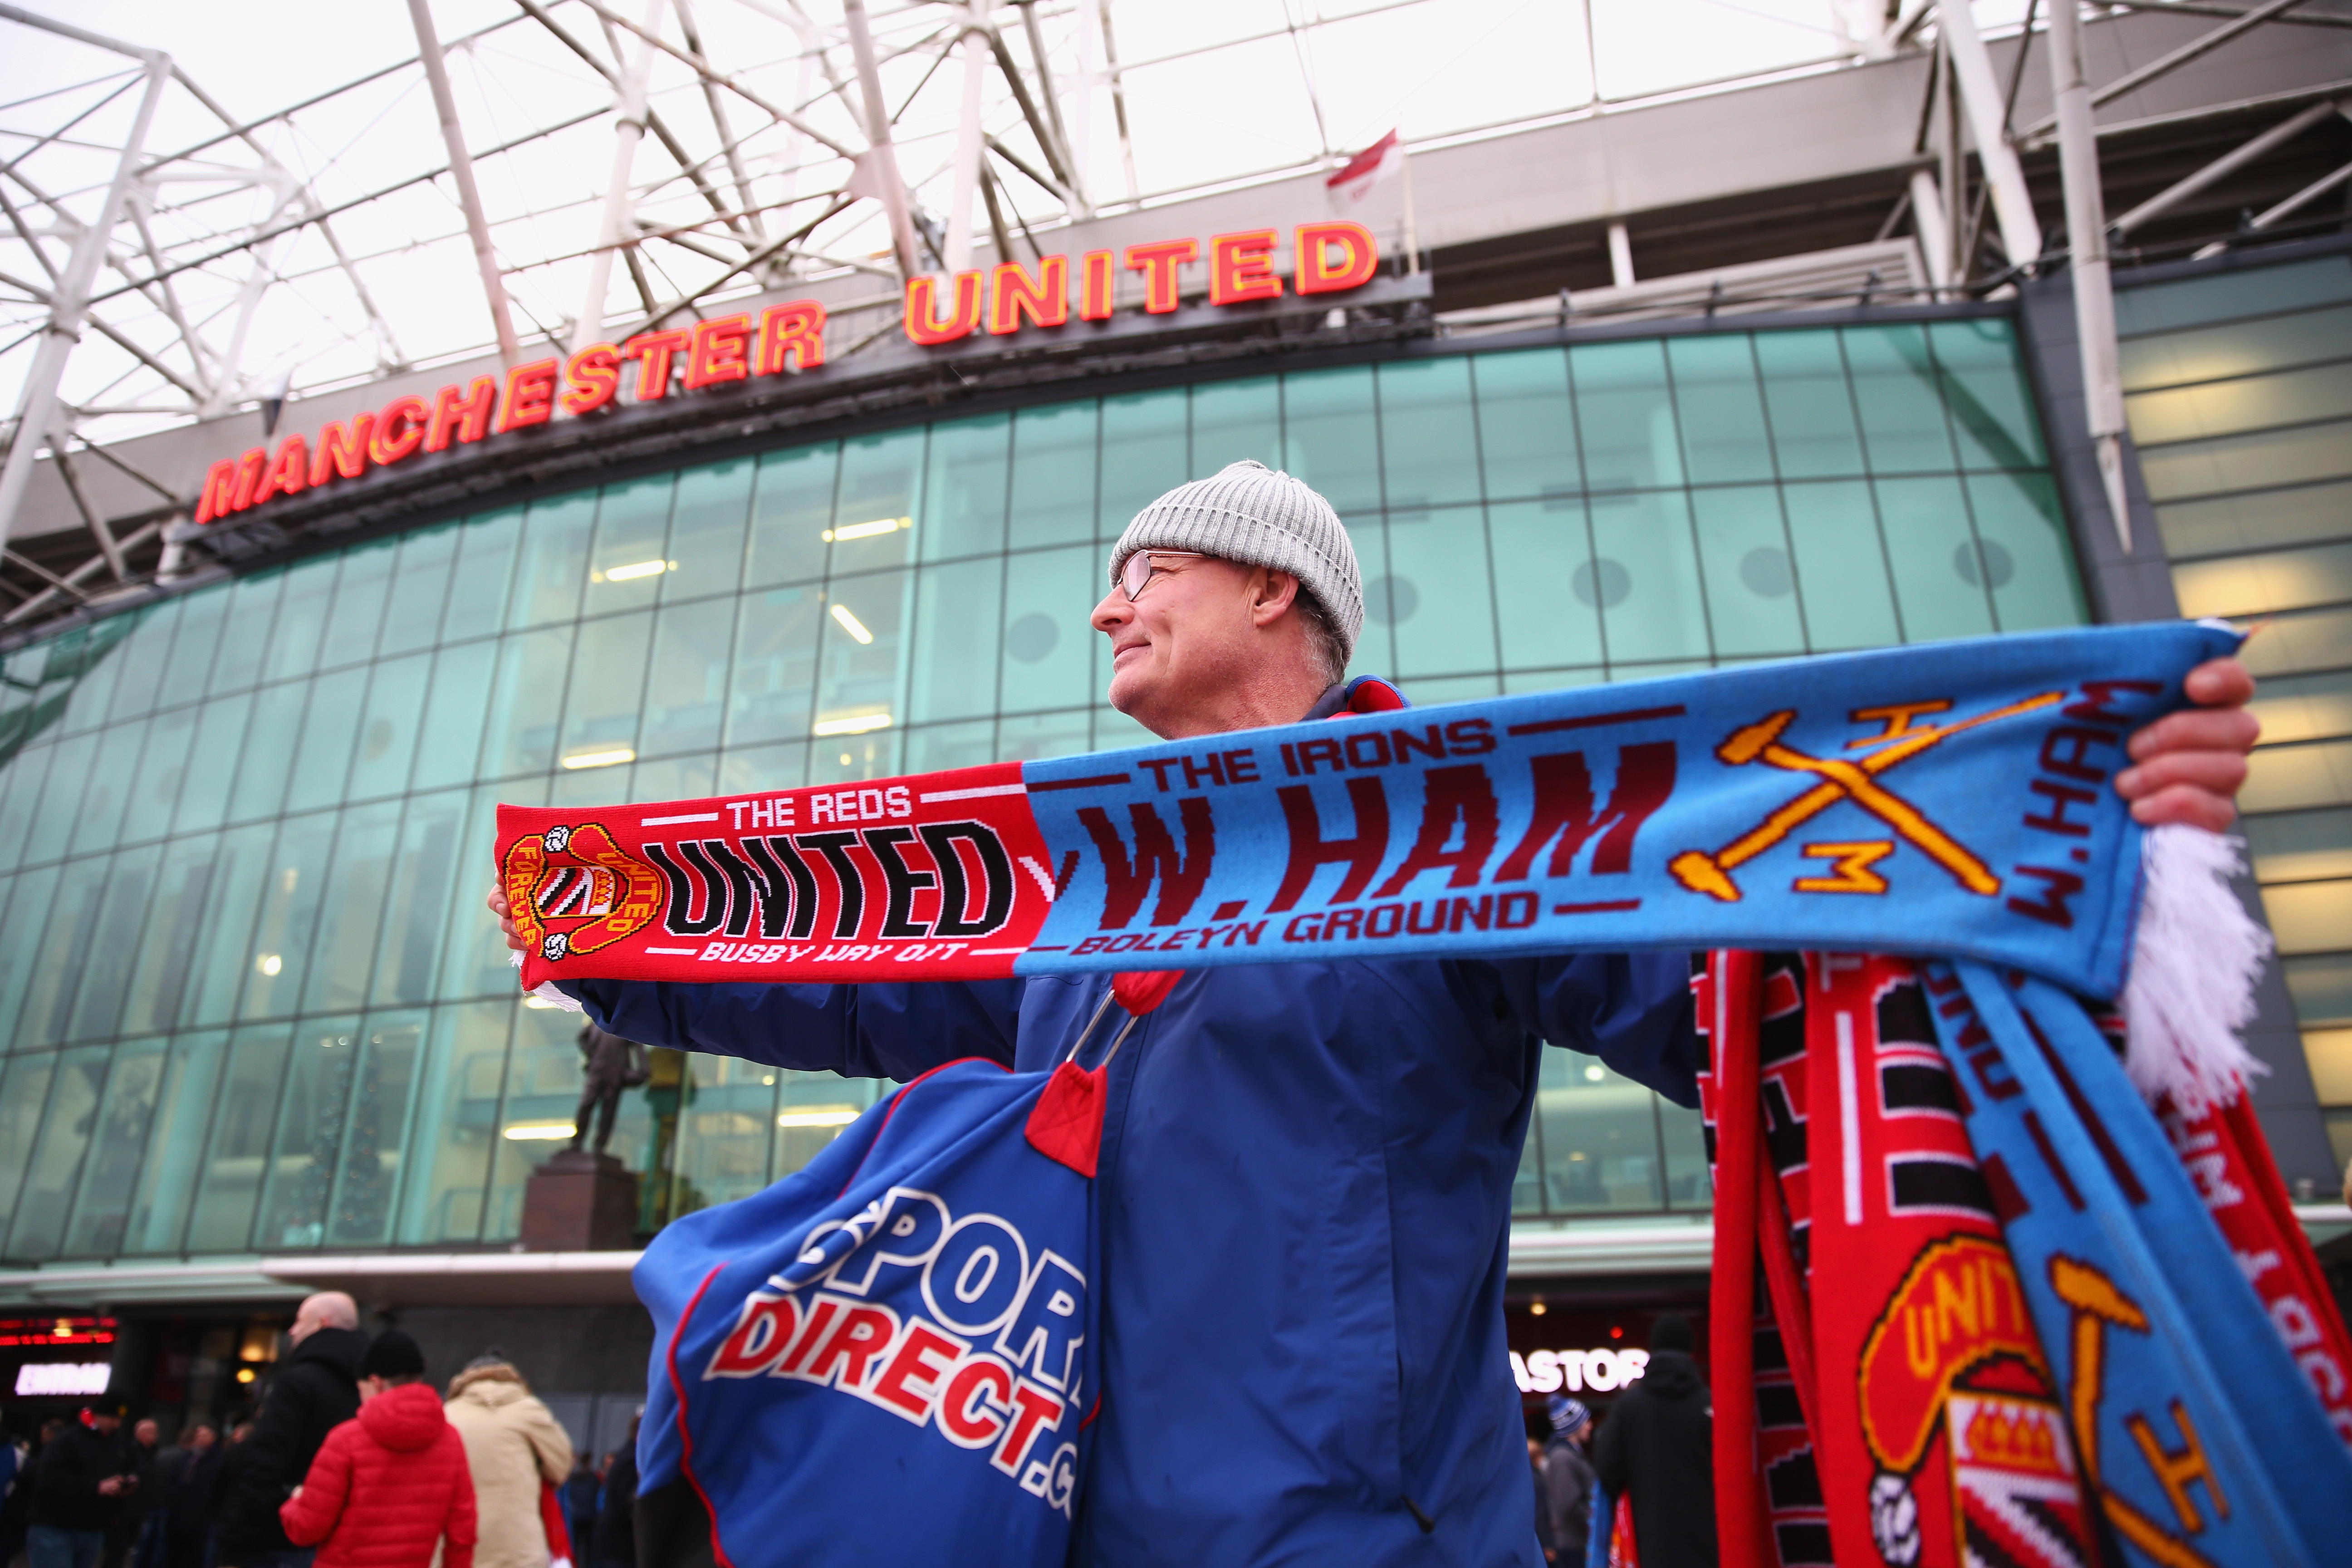 MANCHESTER, ENGLAND - DECEMBER 05:  Matchday scarves are sold outside the stadium prior to the Barclays Premier League match between Manchester United and West Ham United at Old Trafford on December 5, 2015 in Manchester, England.  (Photo by Clive Brunskill/Getty Images)